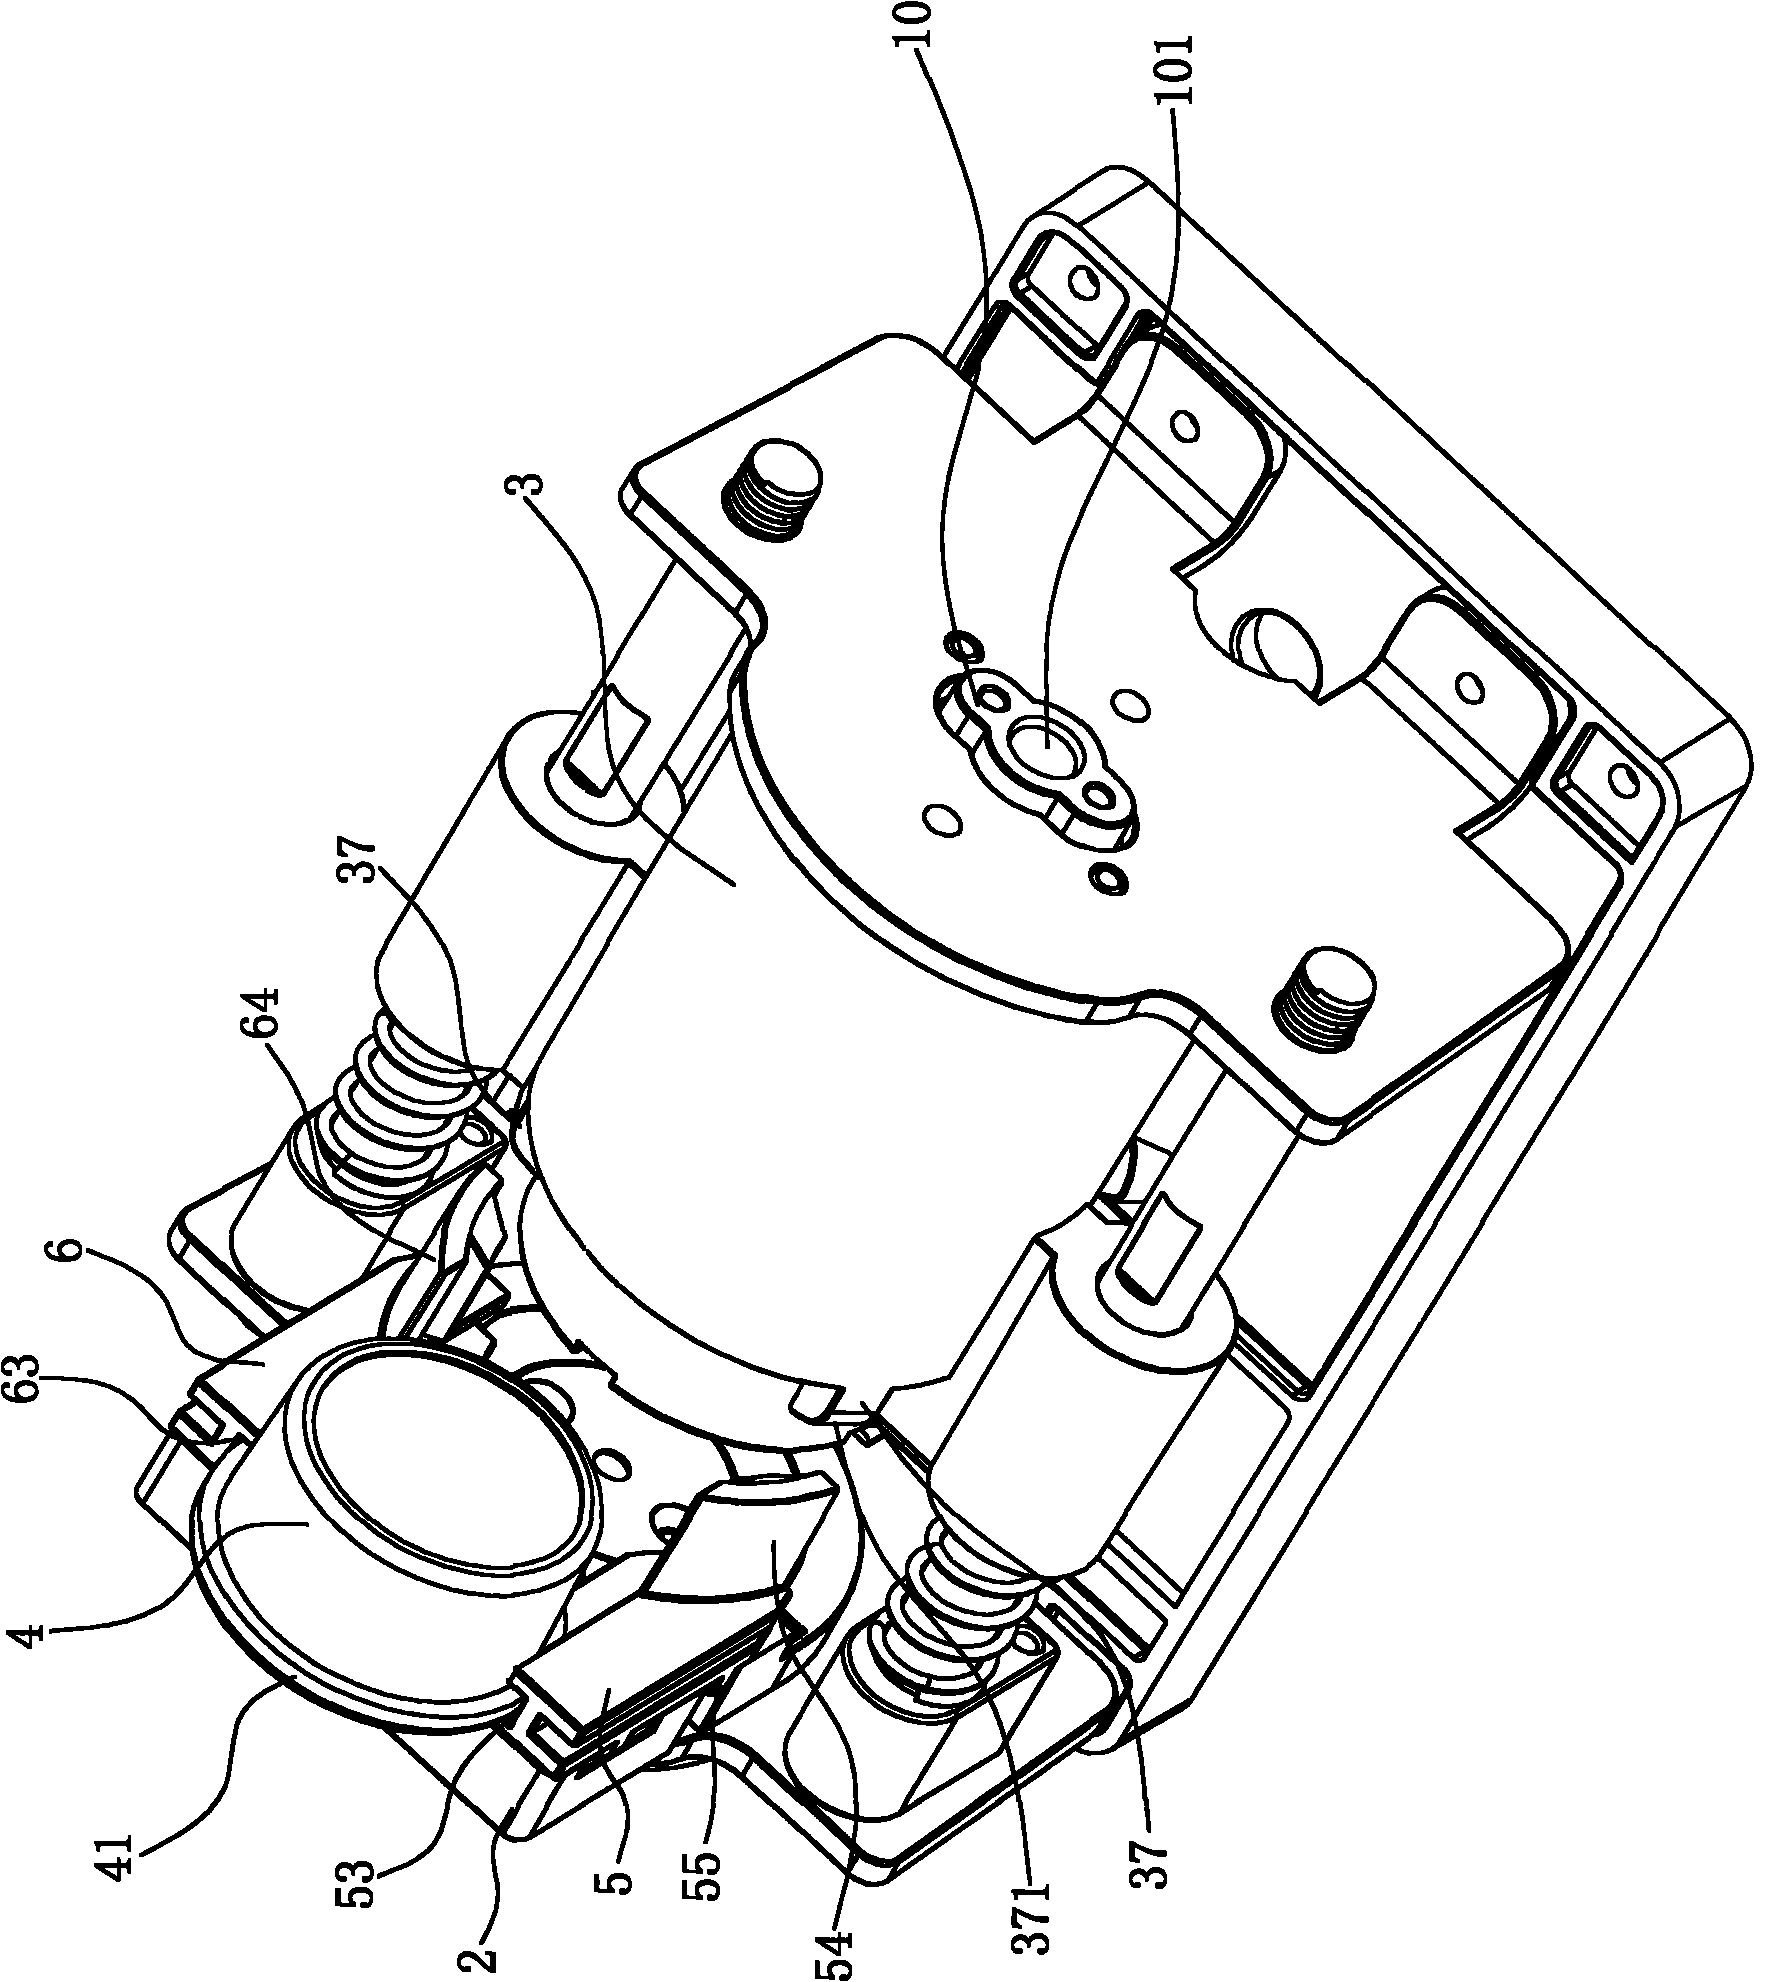 Packet sending and falling structure of beverage brewing device